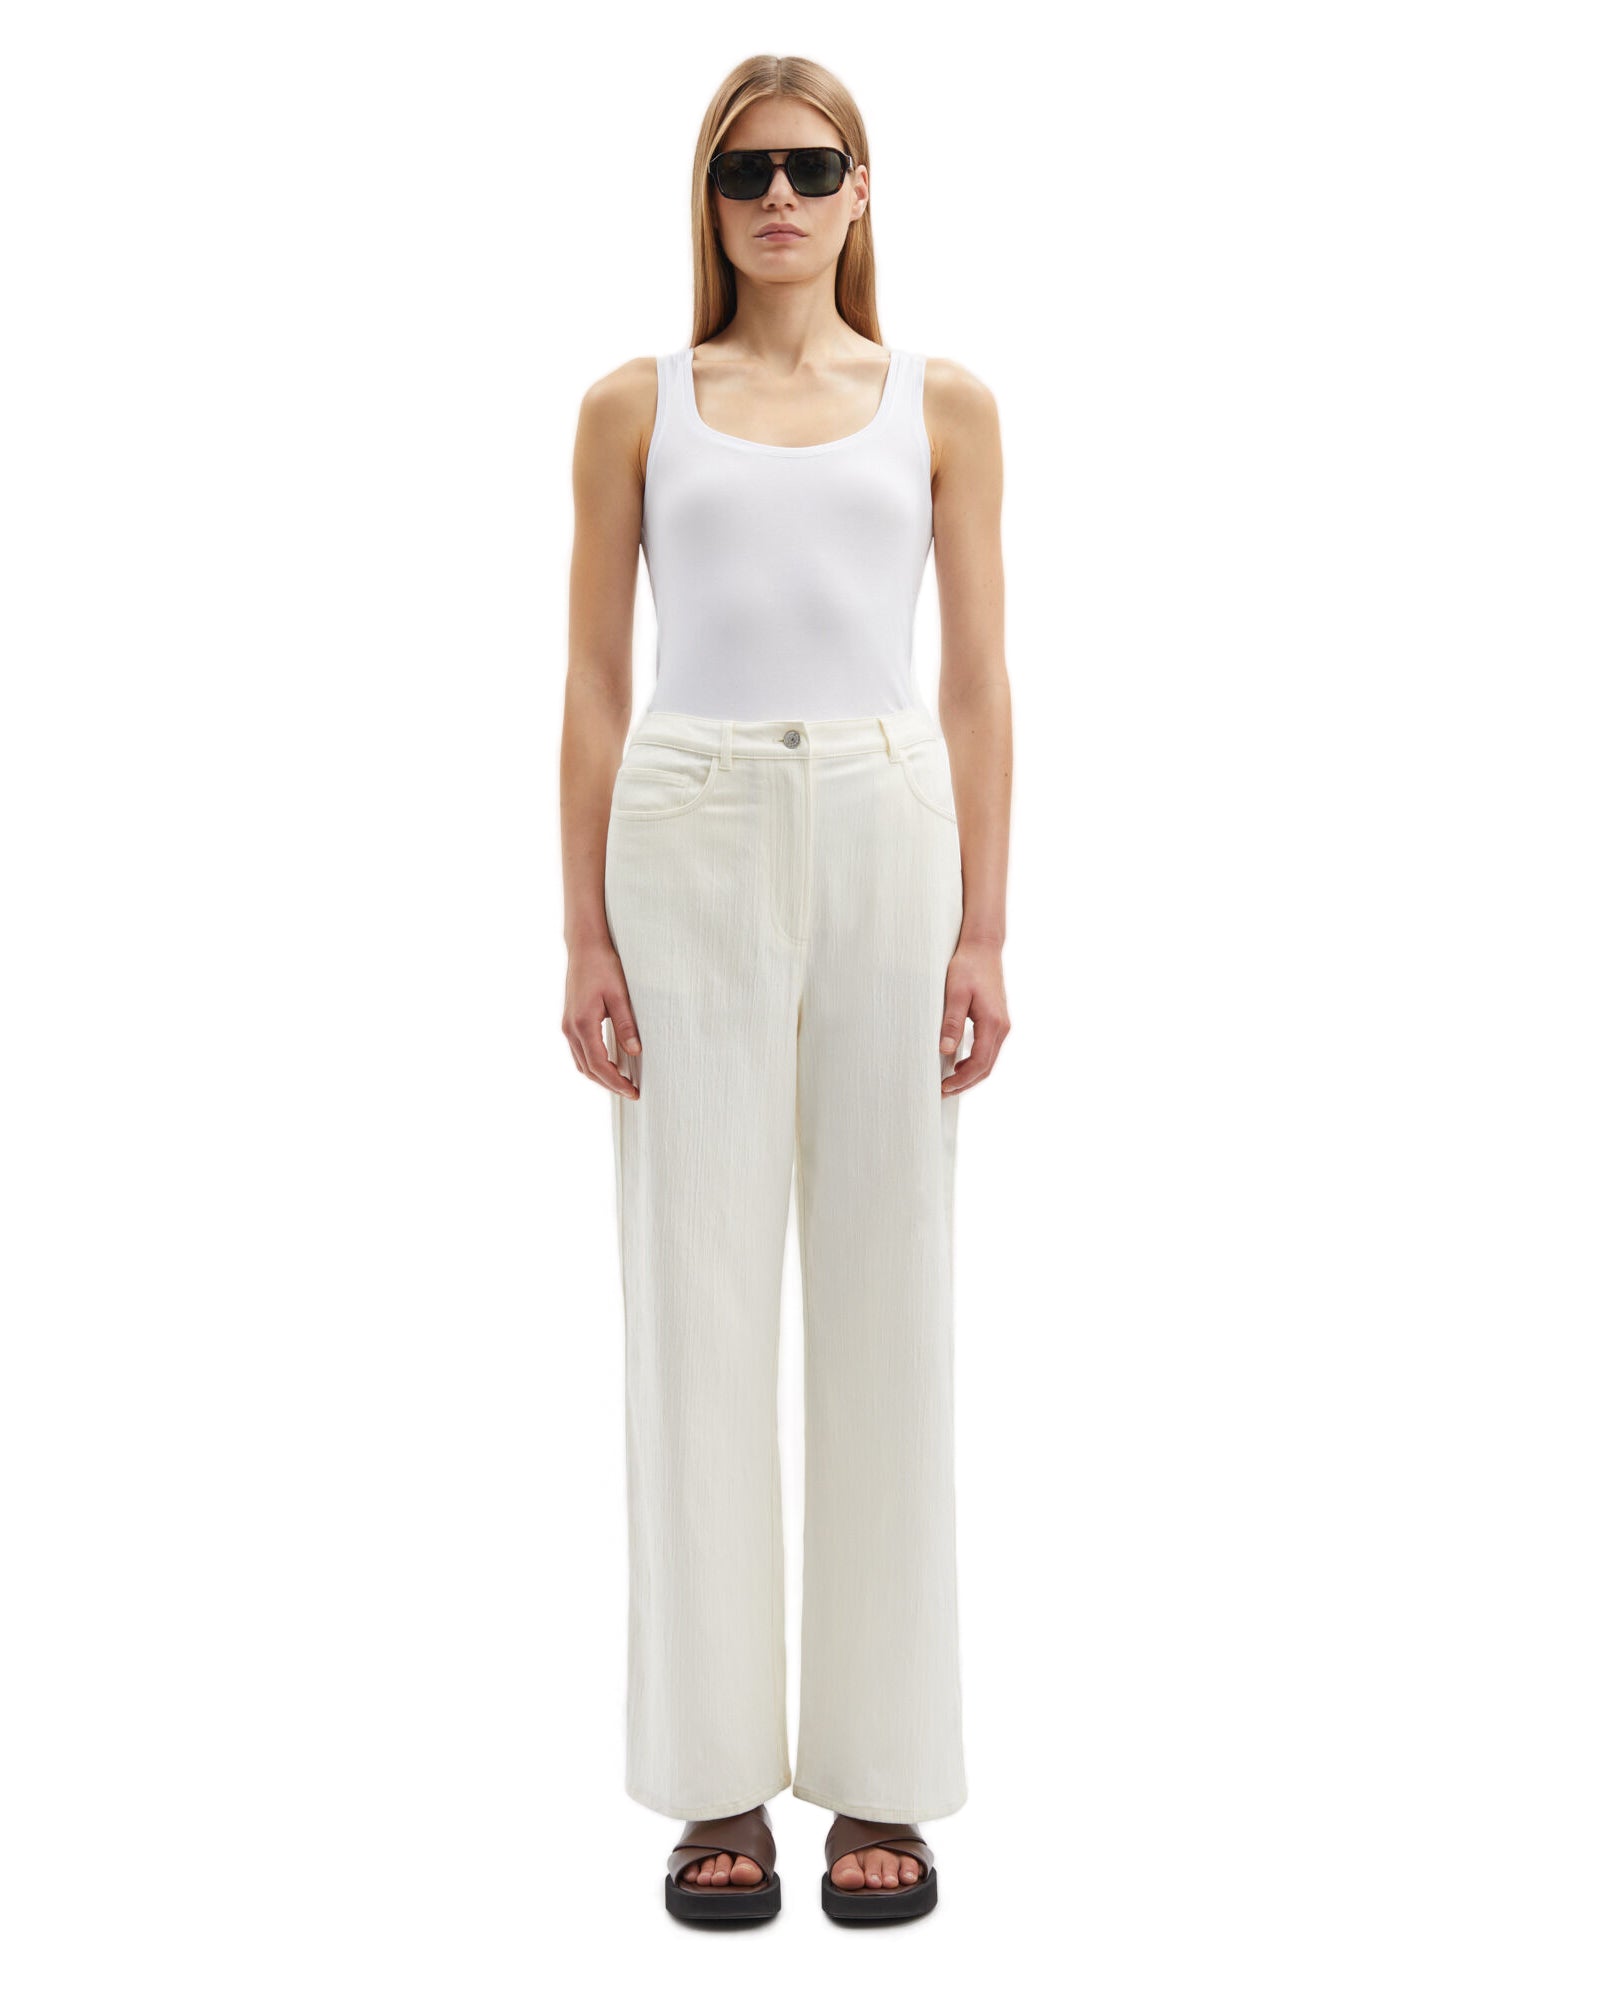 Sashelly 15127 Trousers - Solitary Star